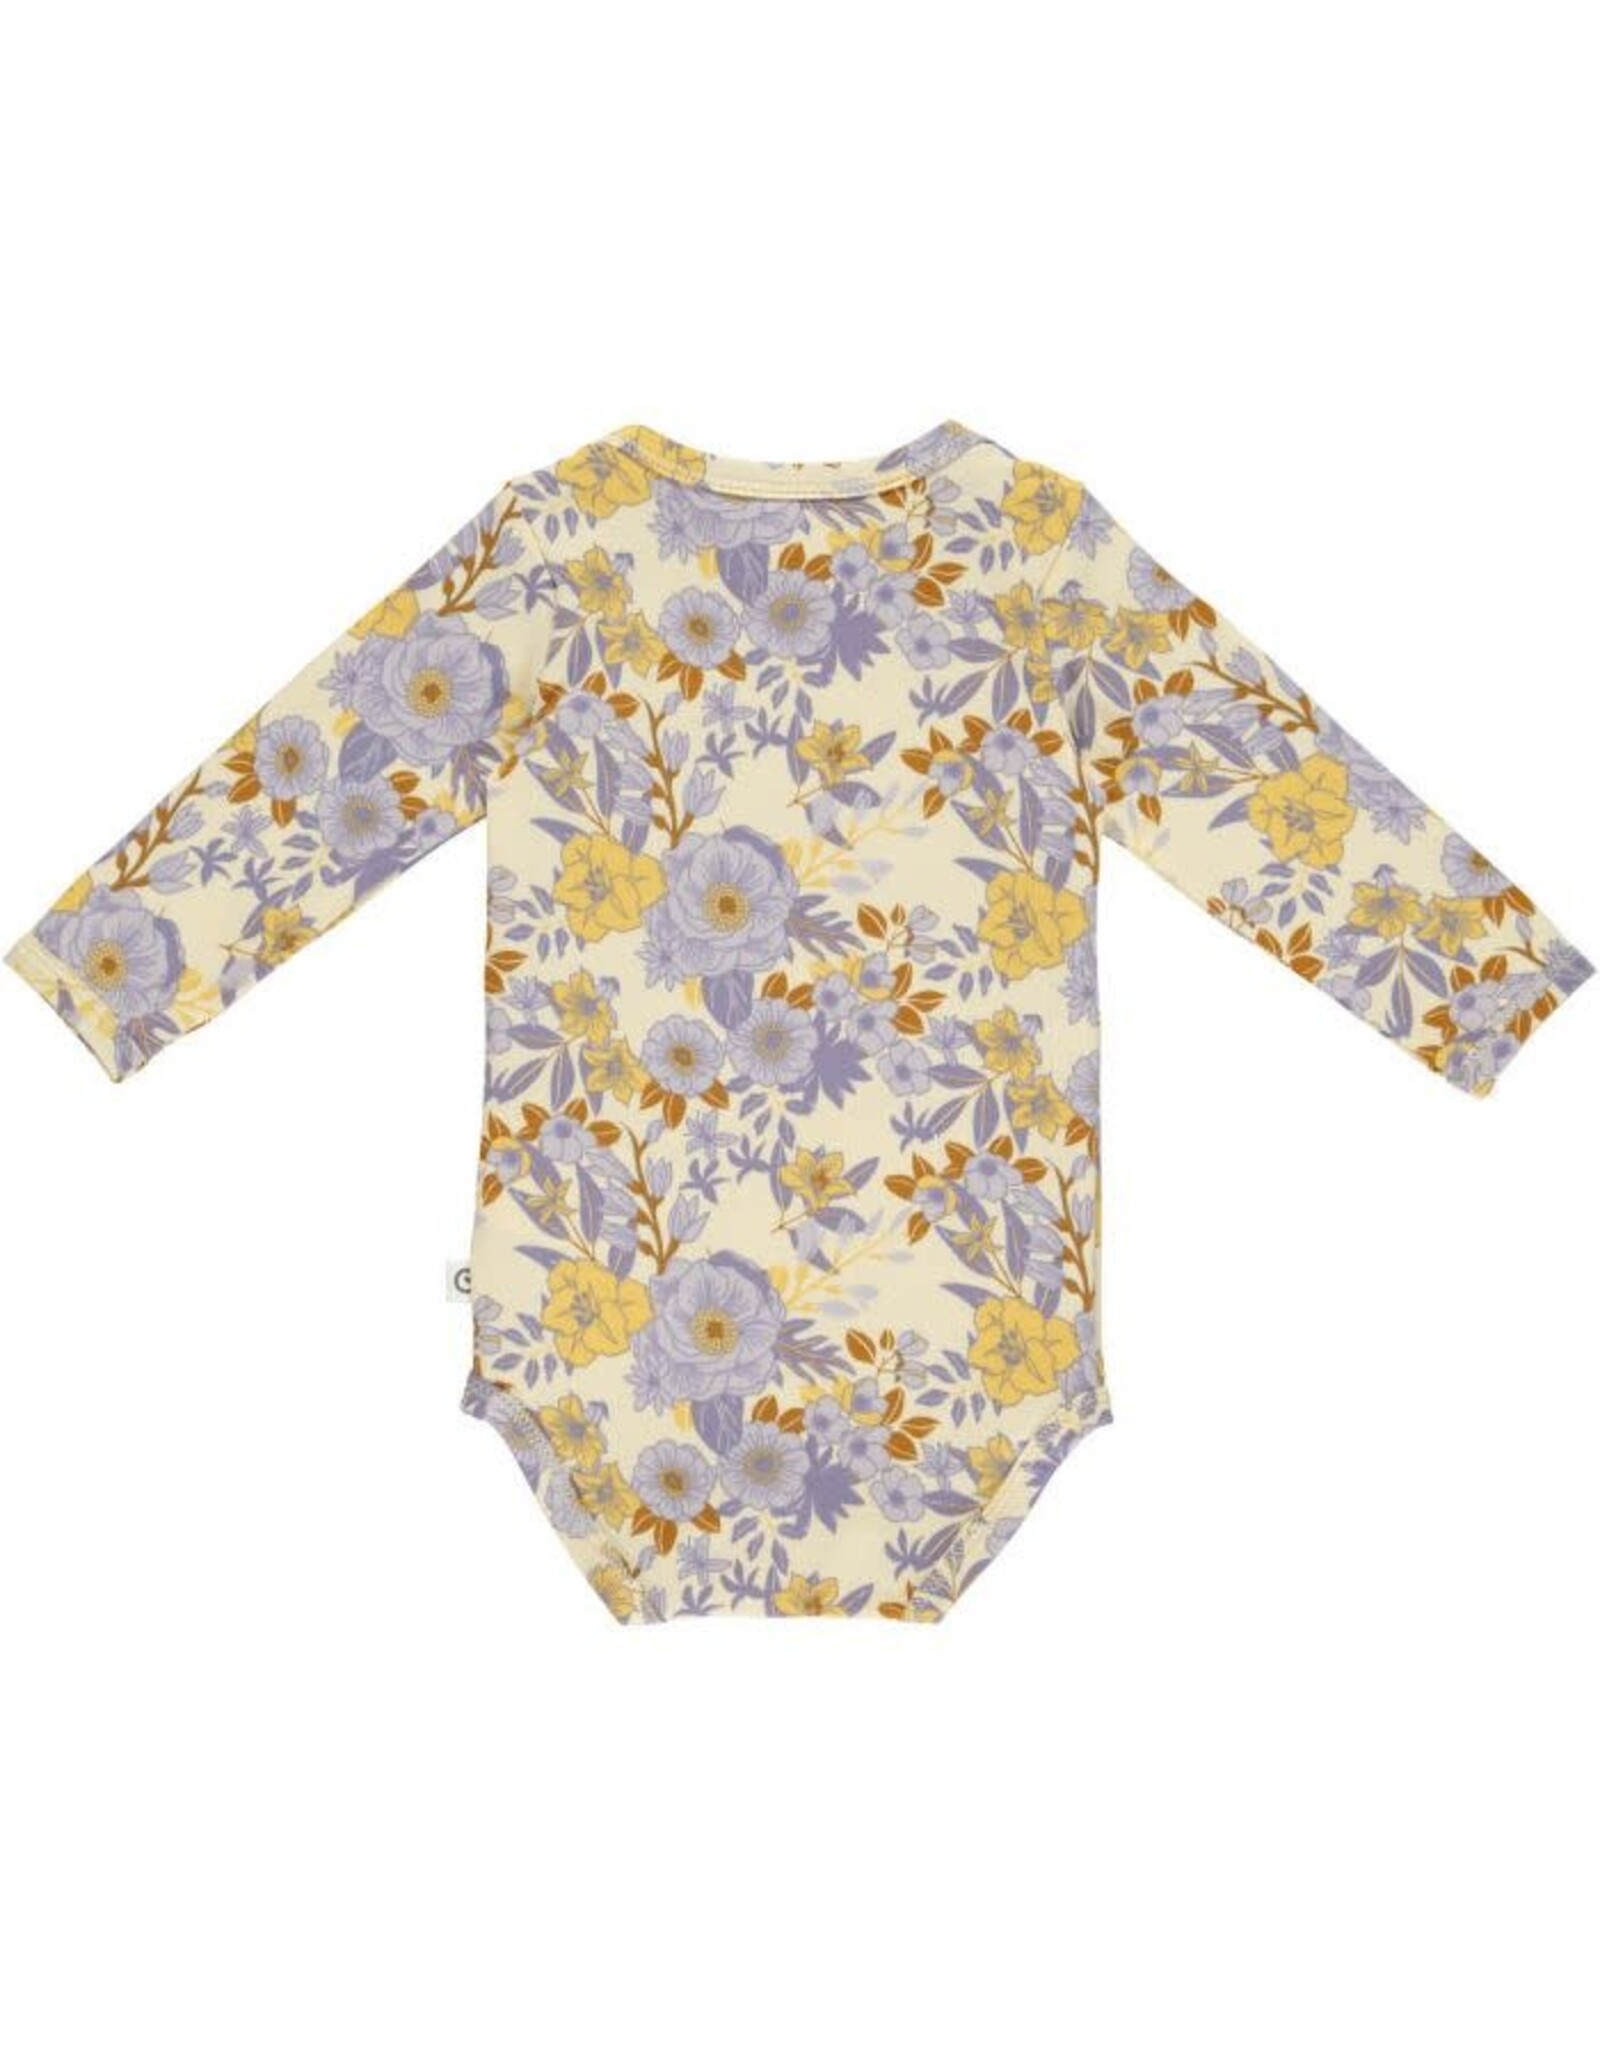 Green Cotton Cardamine Bodysuit with Floral Print